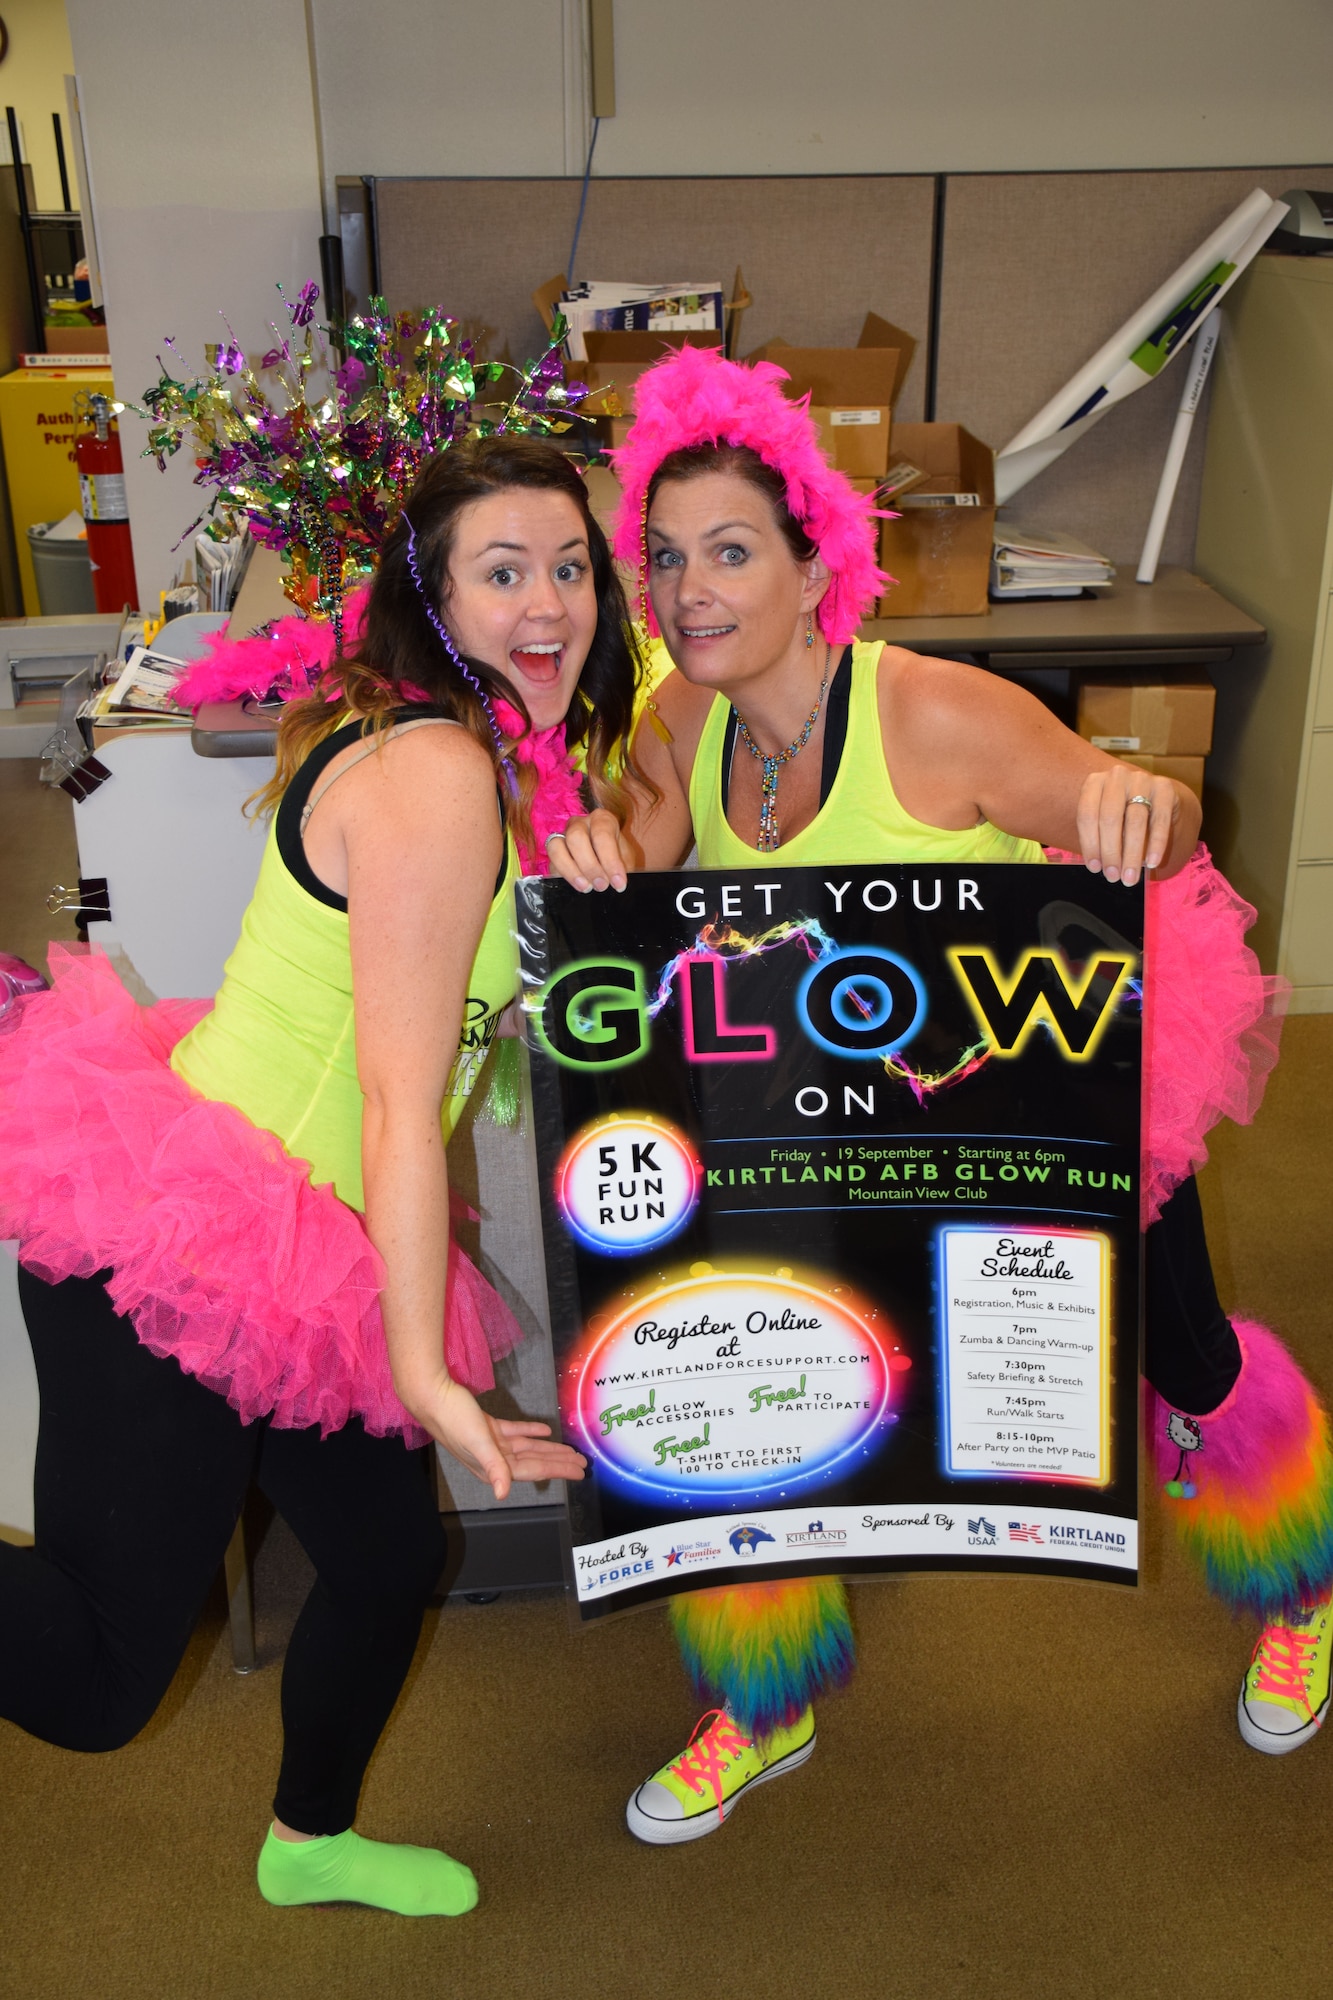 Meaghan Russo, left, and Joanne Perkins of the 377th Force Support Squadron marketing program show their level of commitment to sponsored events by dressing up for a Glow Run. The program won best marketing program in the Air Force. (Courtesy photo)